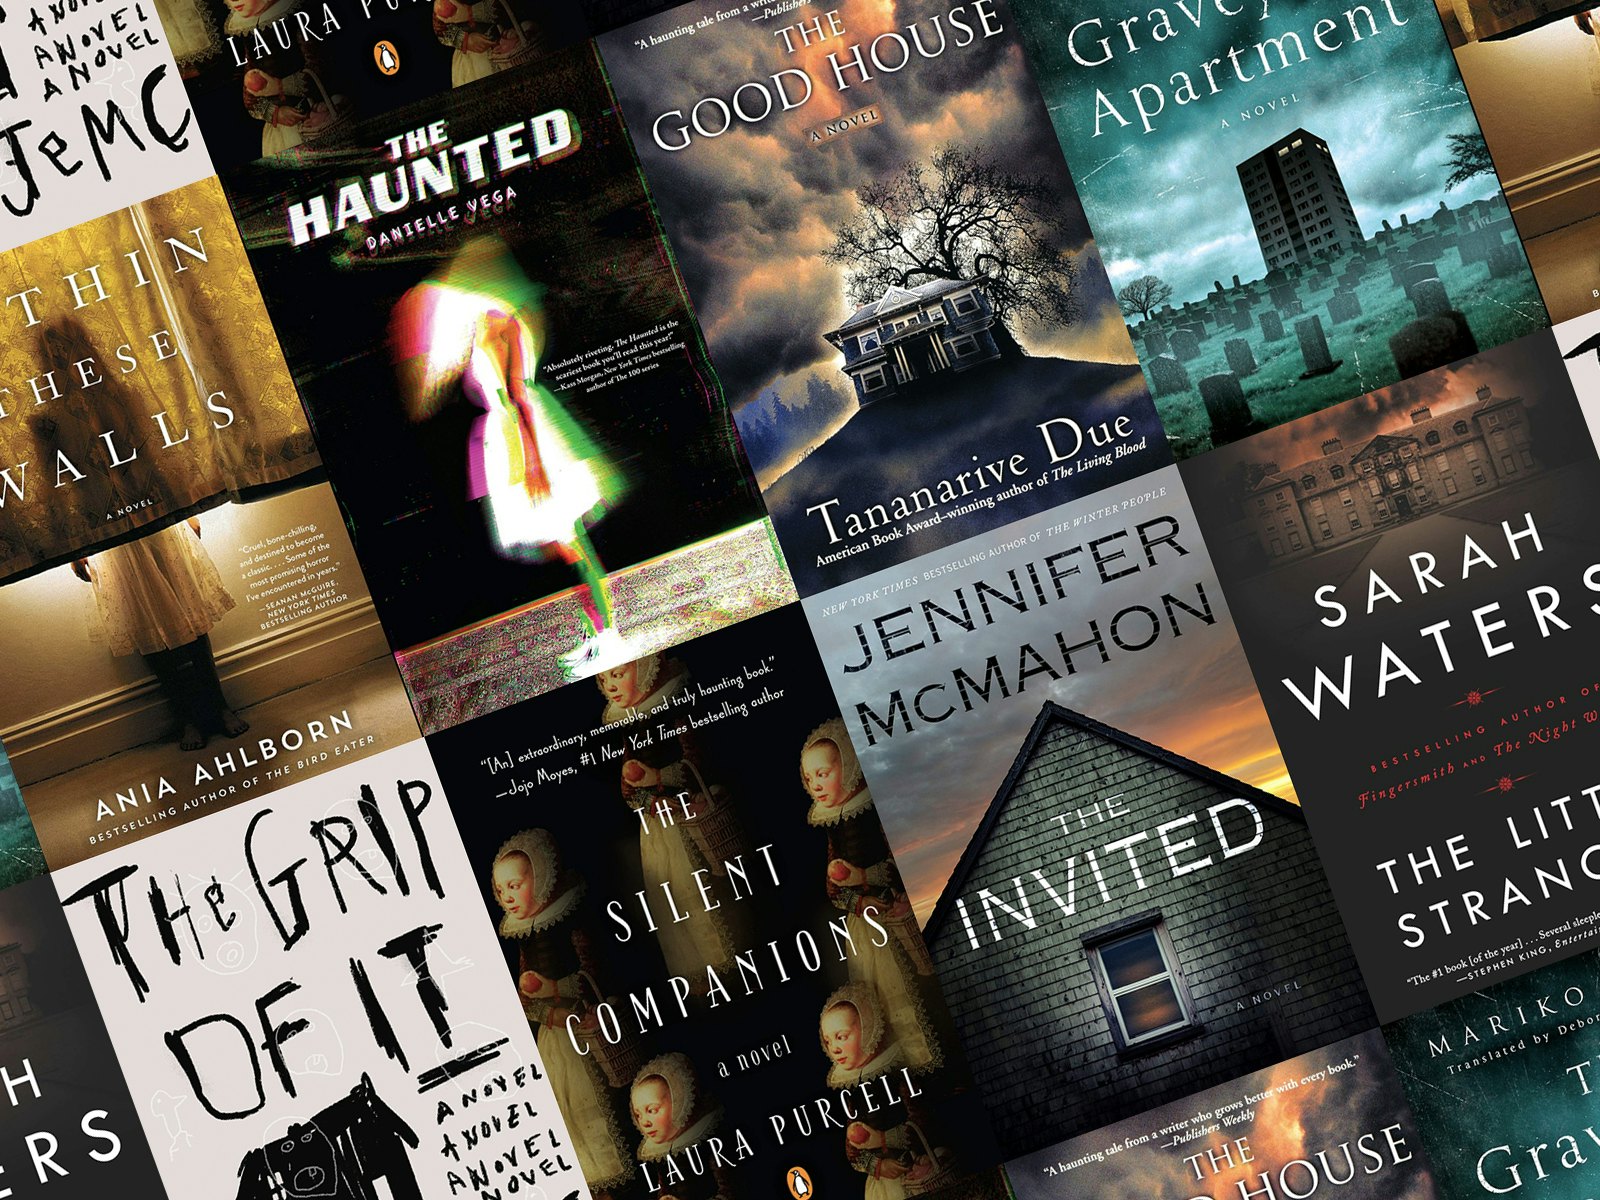 The 13 Haunted House Books That Every Horror Lover Needs To Read Images, Photos, Reviews